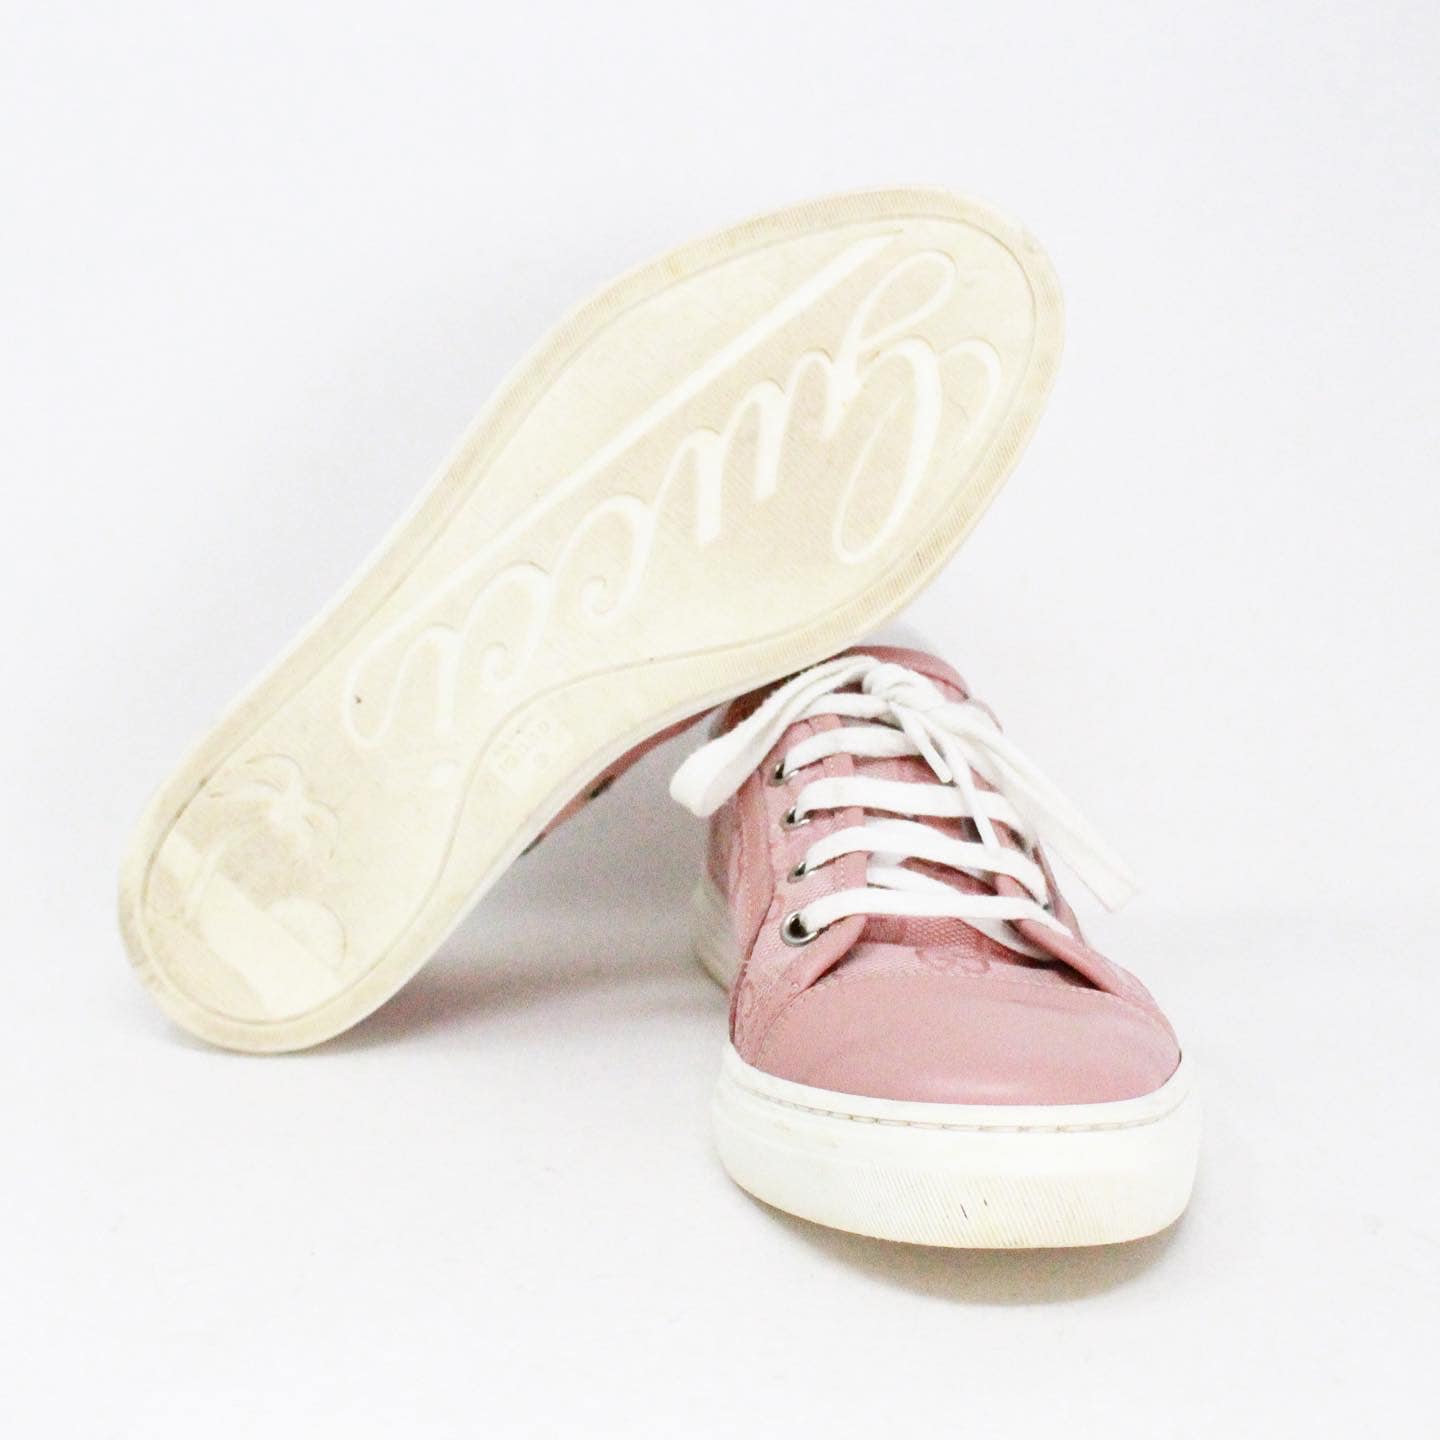 GUCCI #40287 Pink GG Canvas Sneakers (US 7.5 EU 37.5)